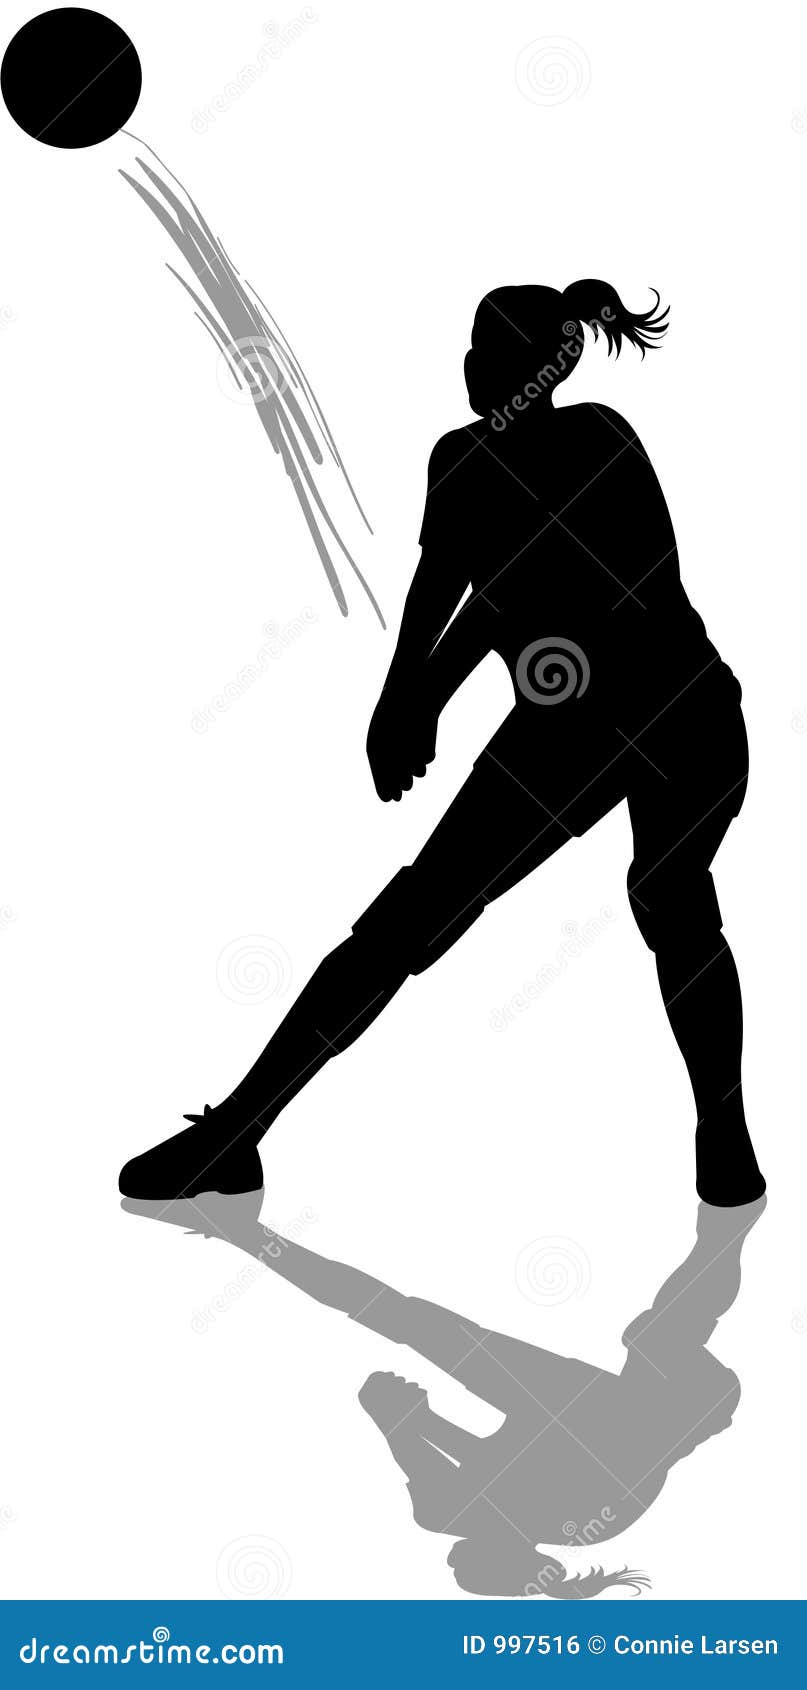 volleyball silhouette clip art - photo #30